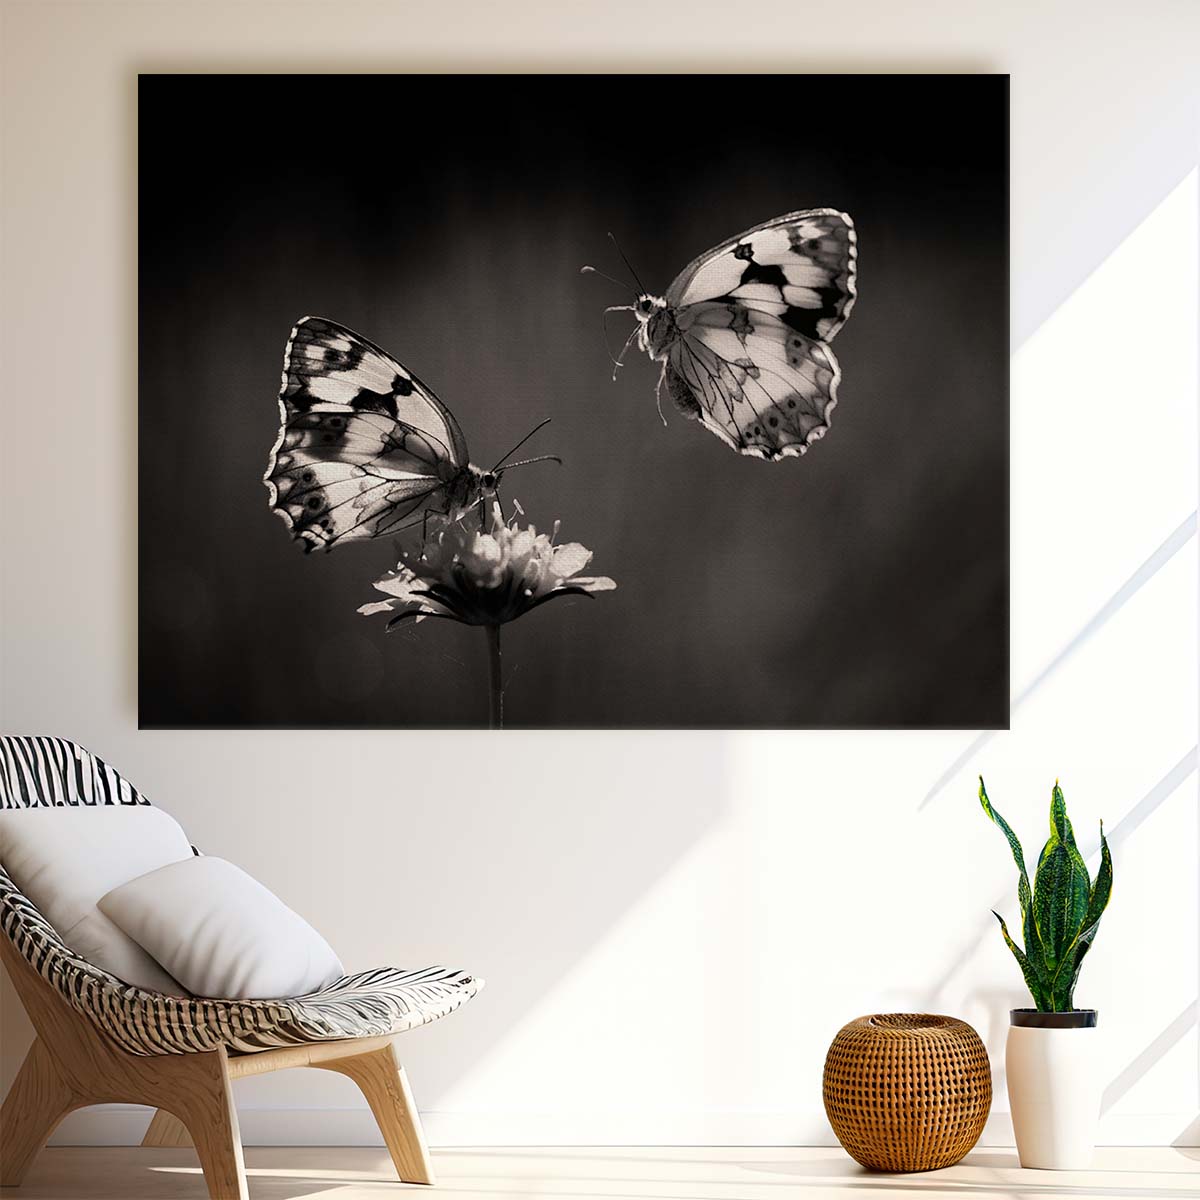 Romantic Butterfly Pair in Sepia Floral Macro Wall Art by Luxuriance Designs. Made in USA.